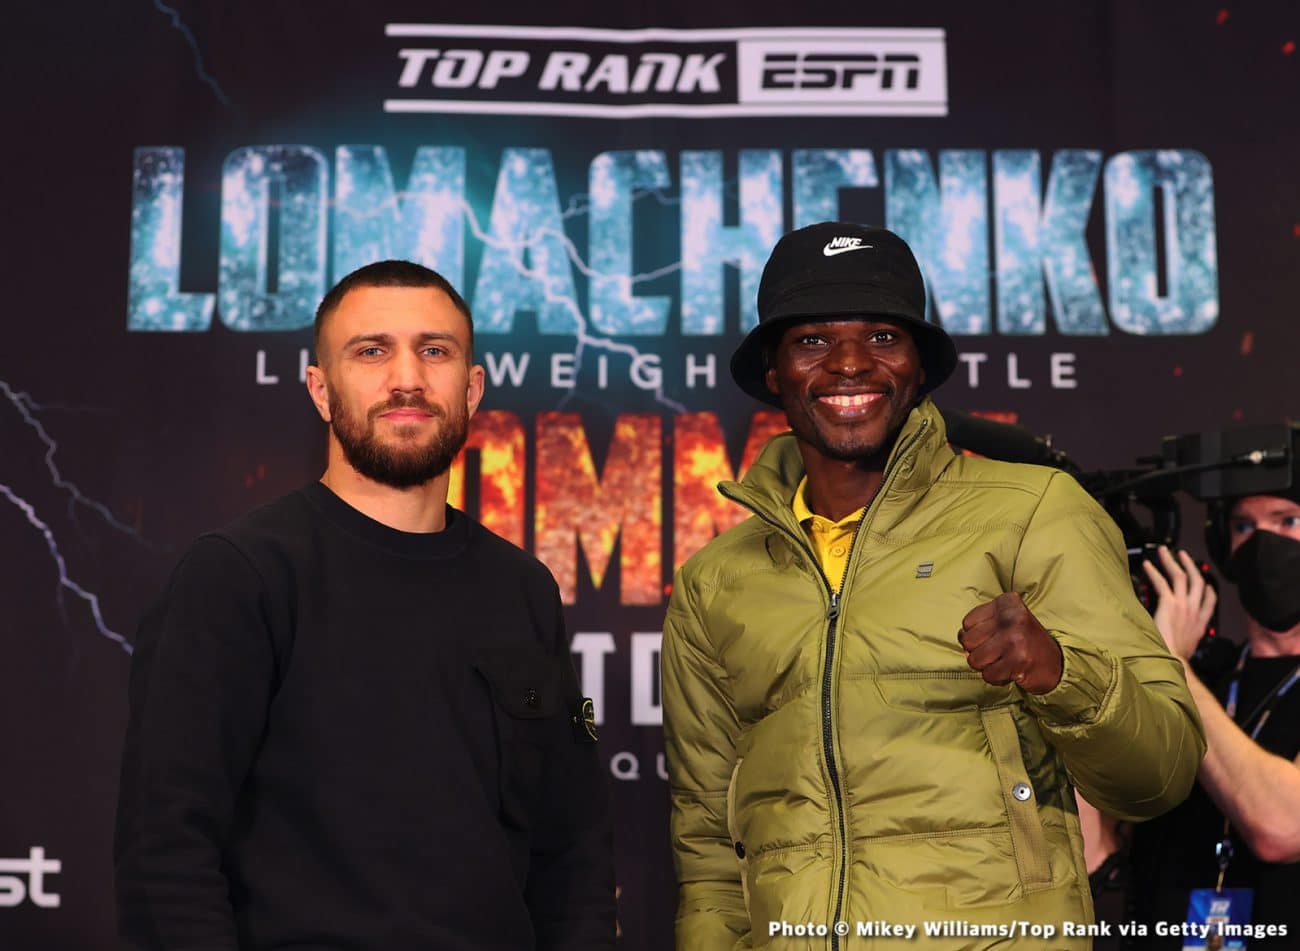 Image: Vasily Lomachenko open to Tank Davis fight, says Mayweather matching him against only beatable opposition